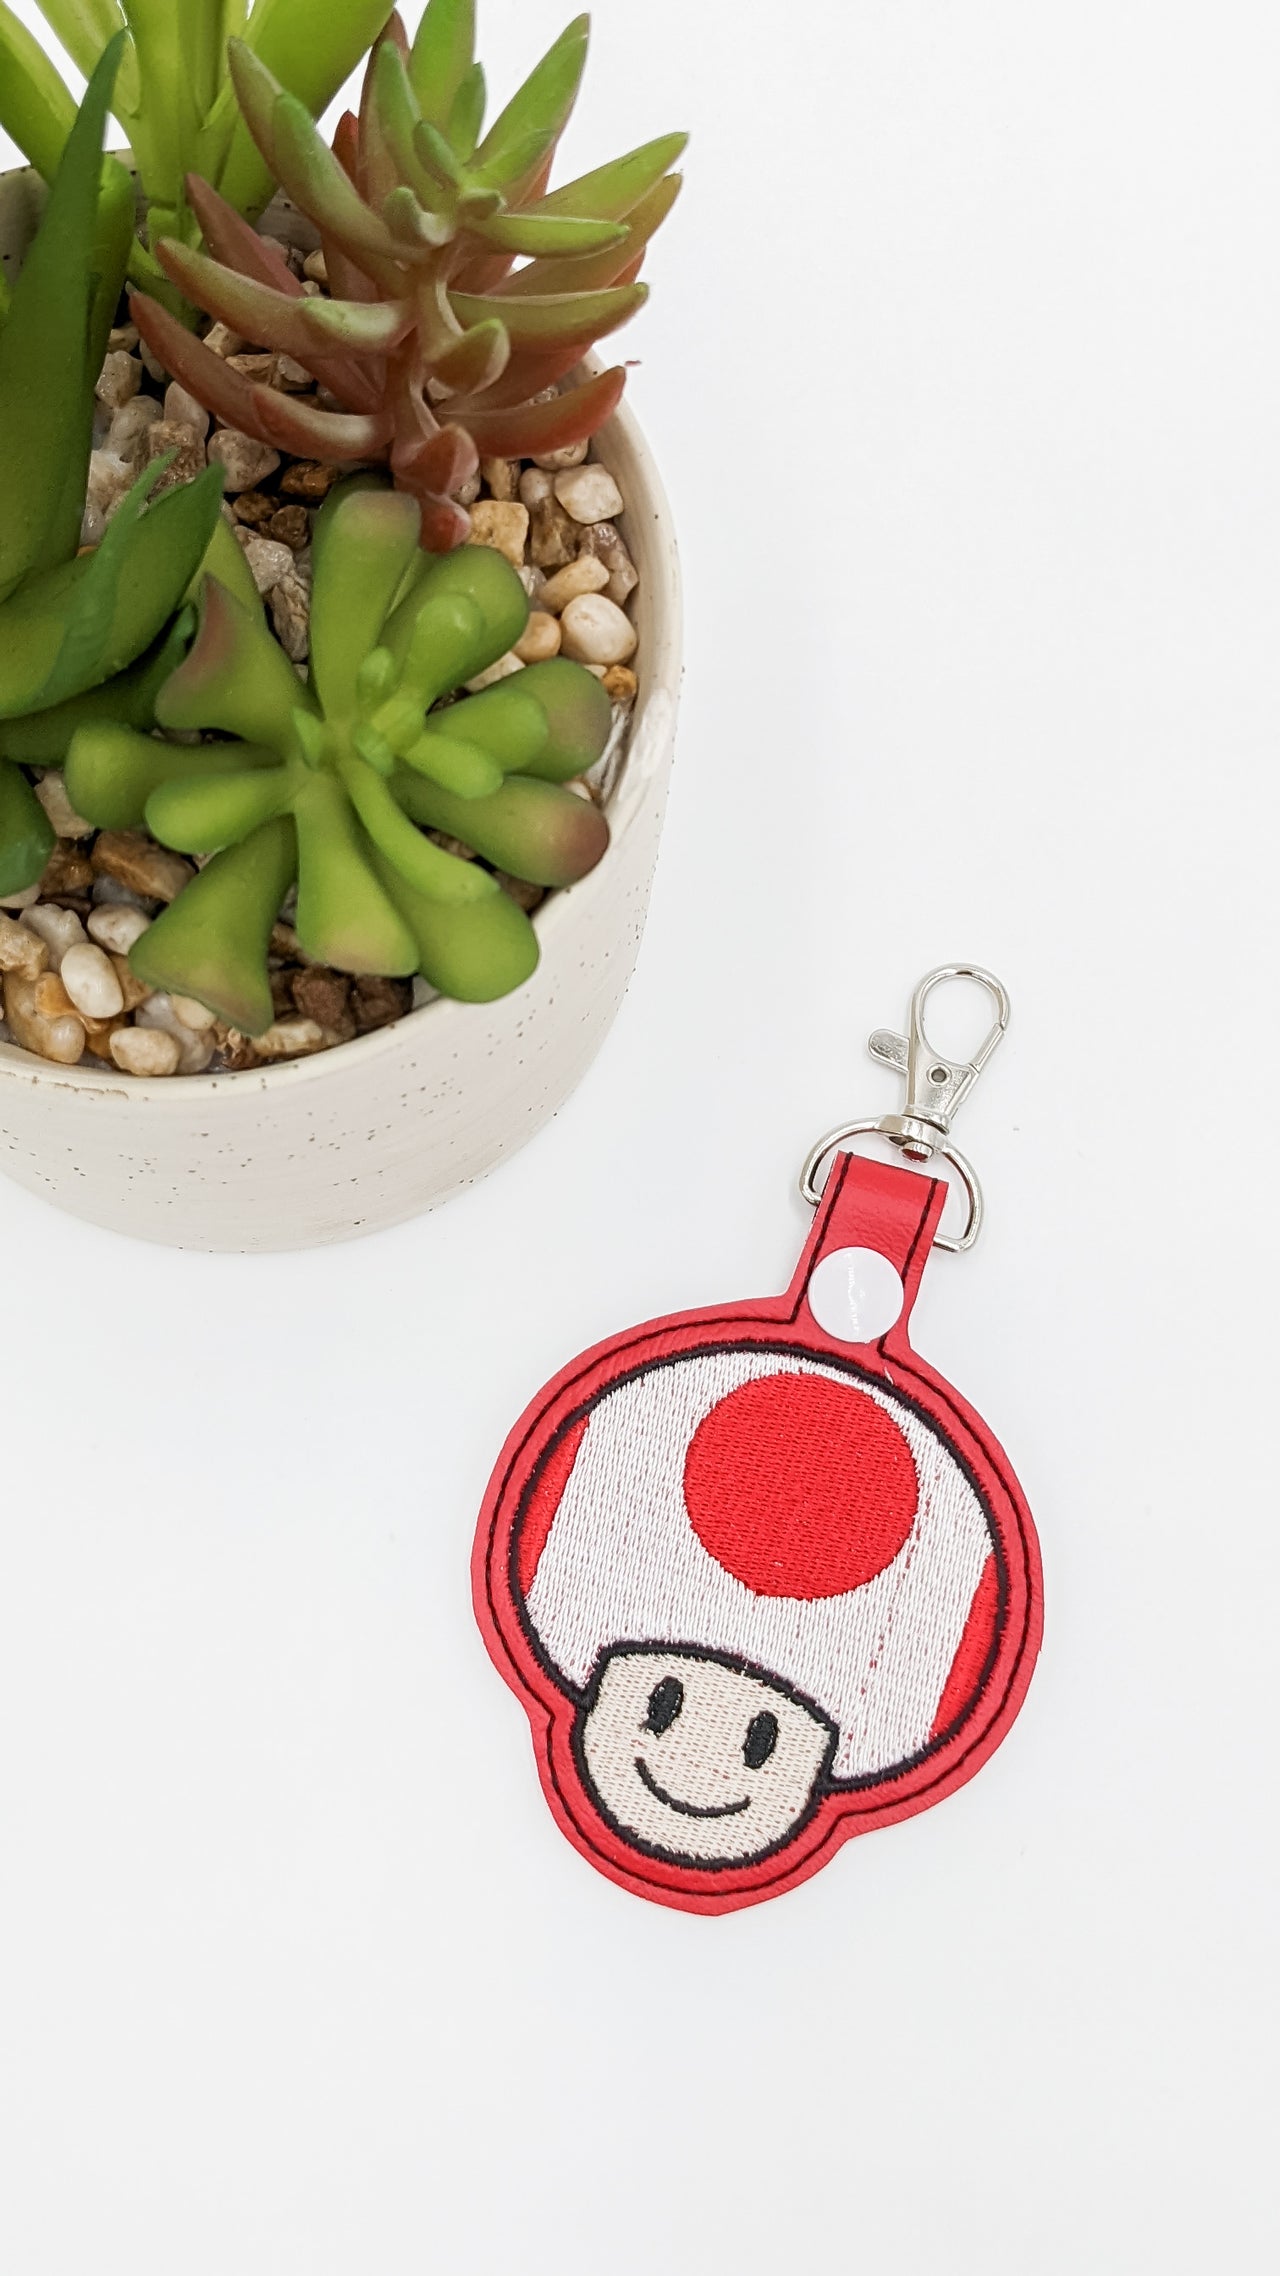 Toad Power Up Keychain